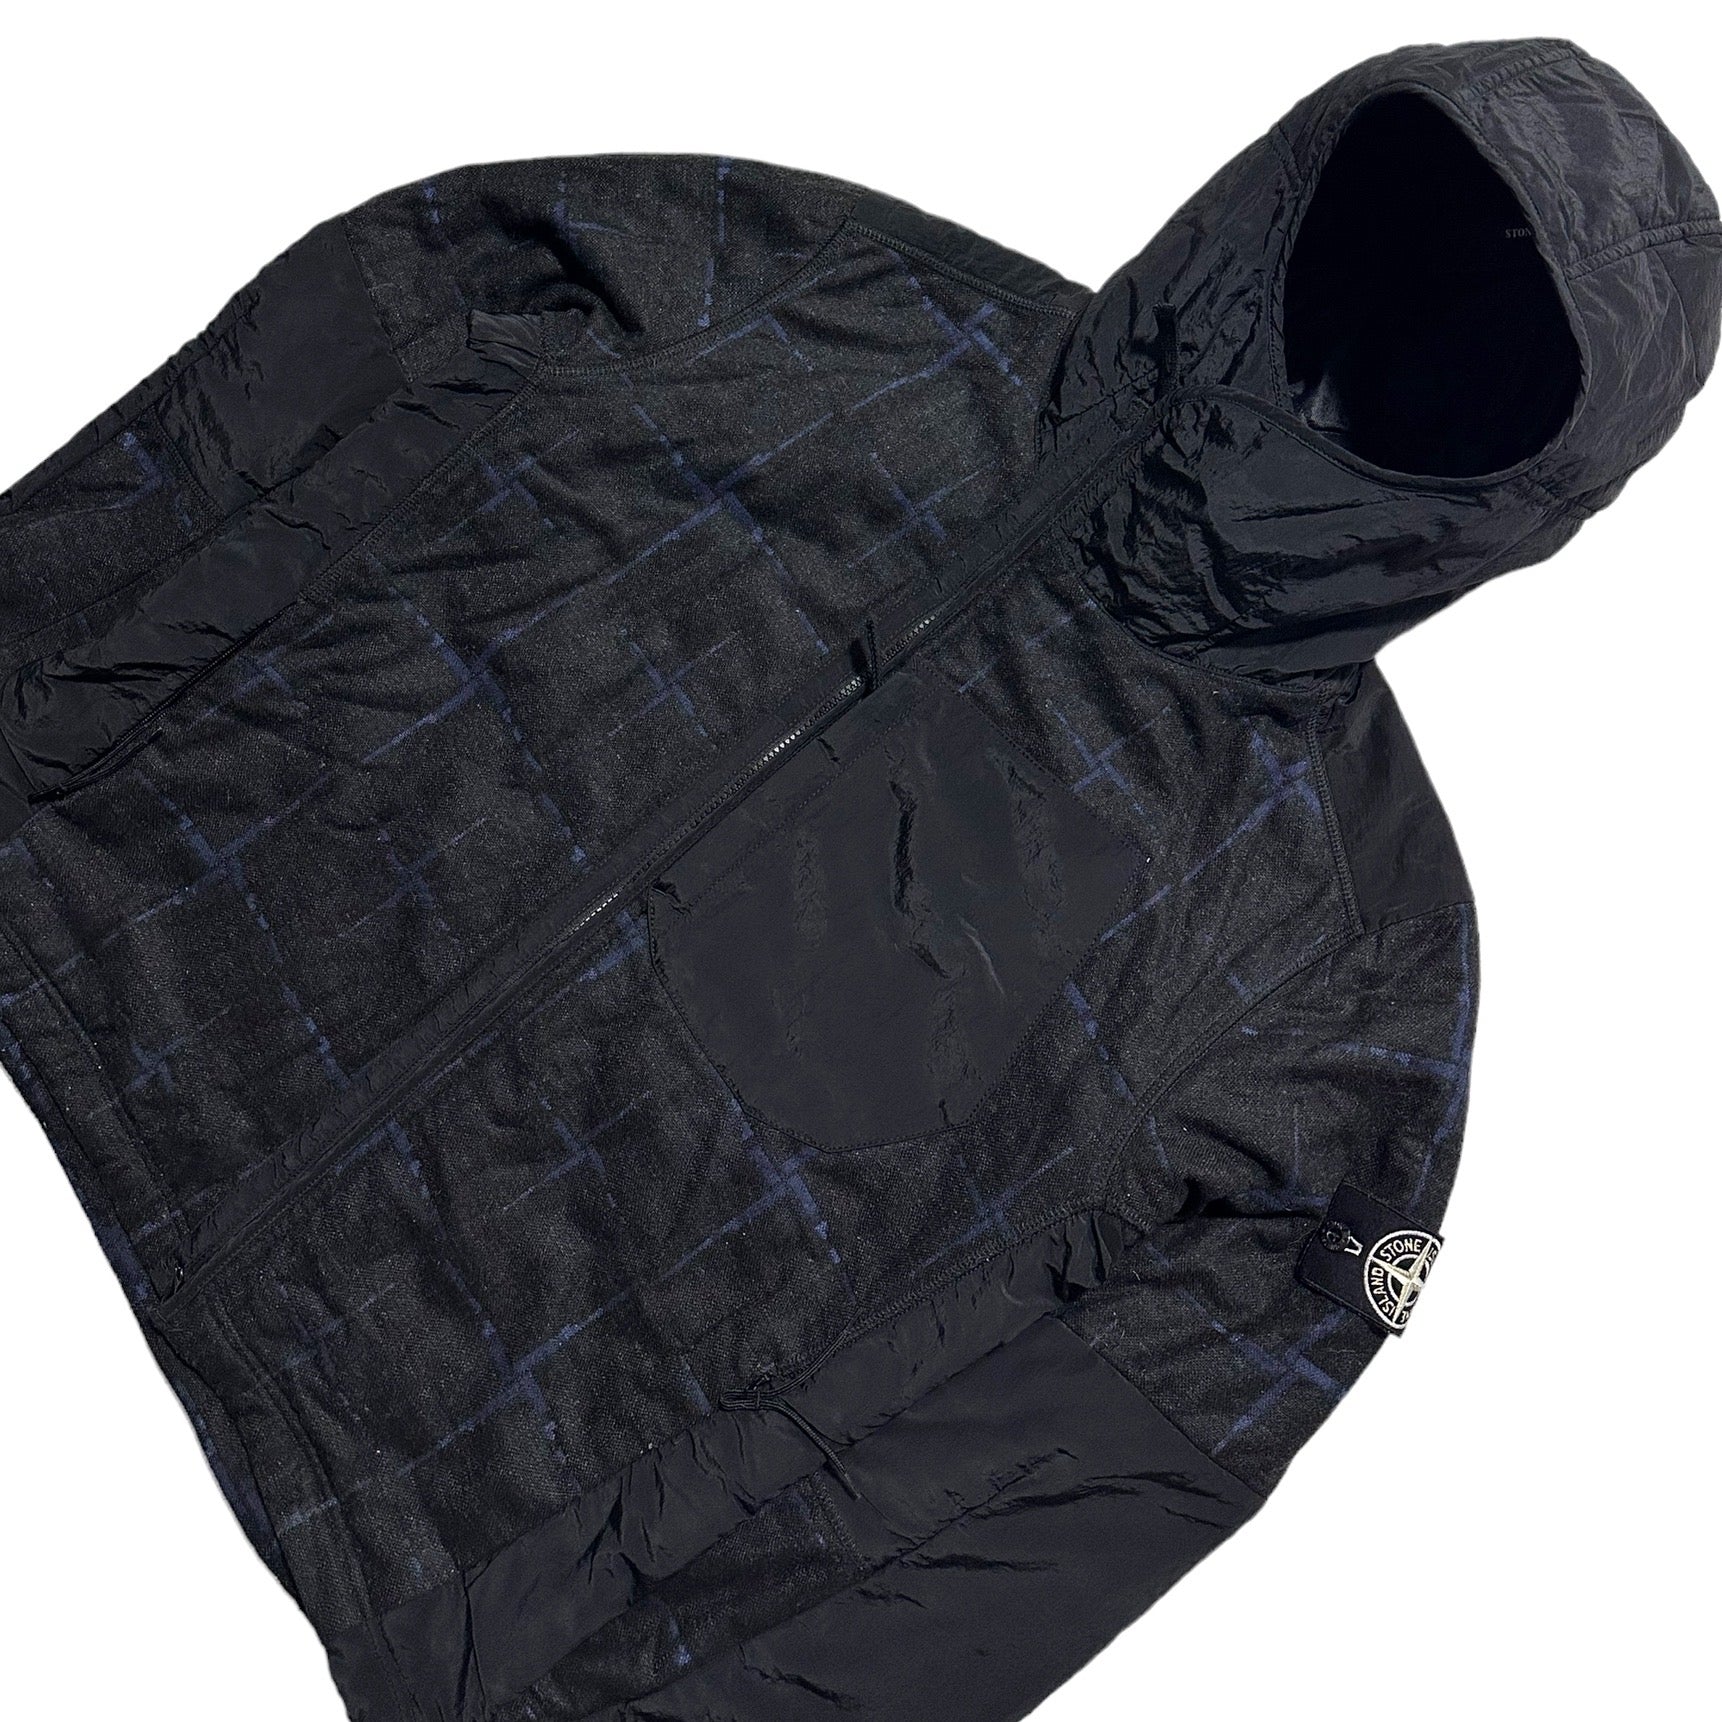 Stone Island Dormeuil House Check Primaloft Jacket with Special Process Badge